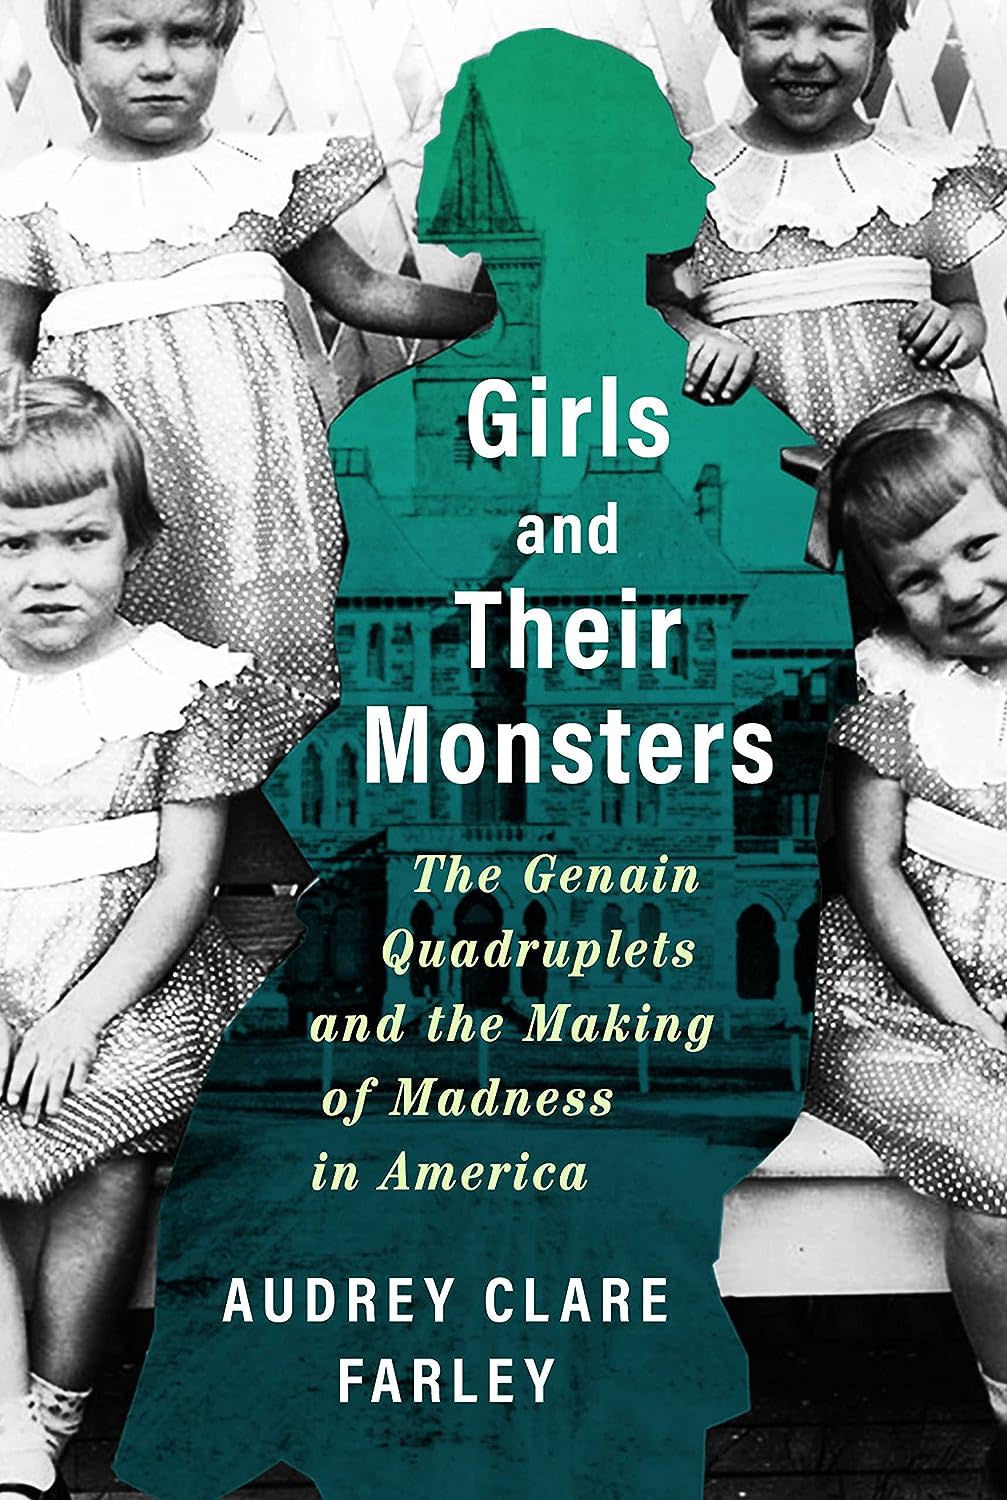 "Girls and Their Monsters: The Genain Quadruplets and the Making of Madness in America"